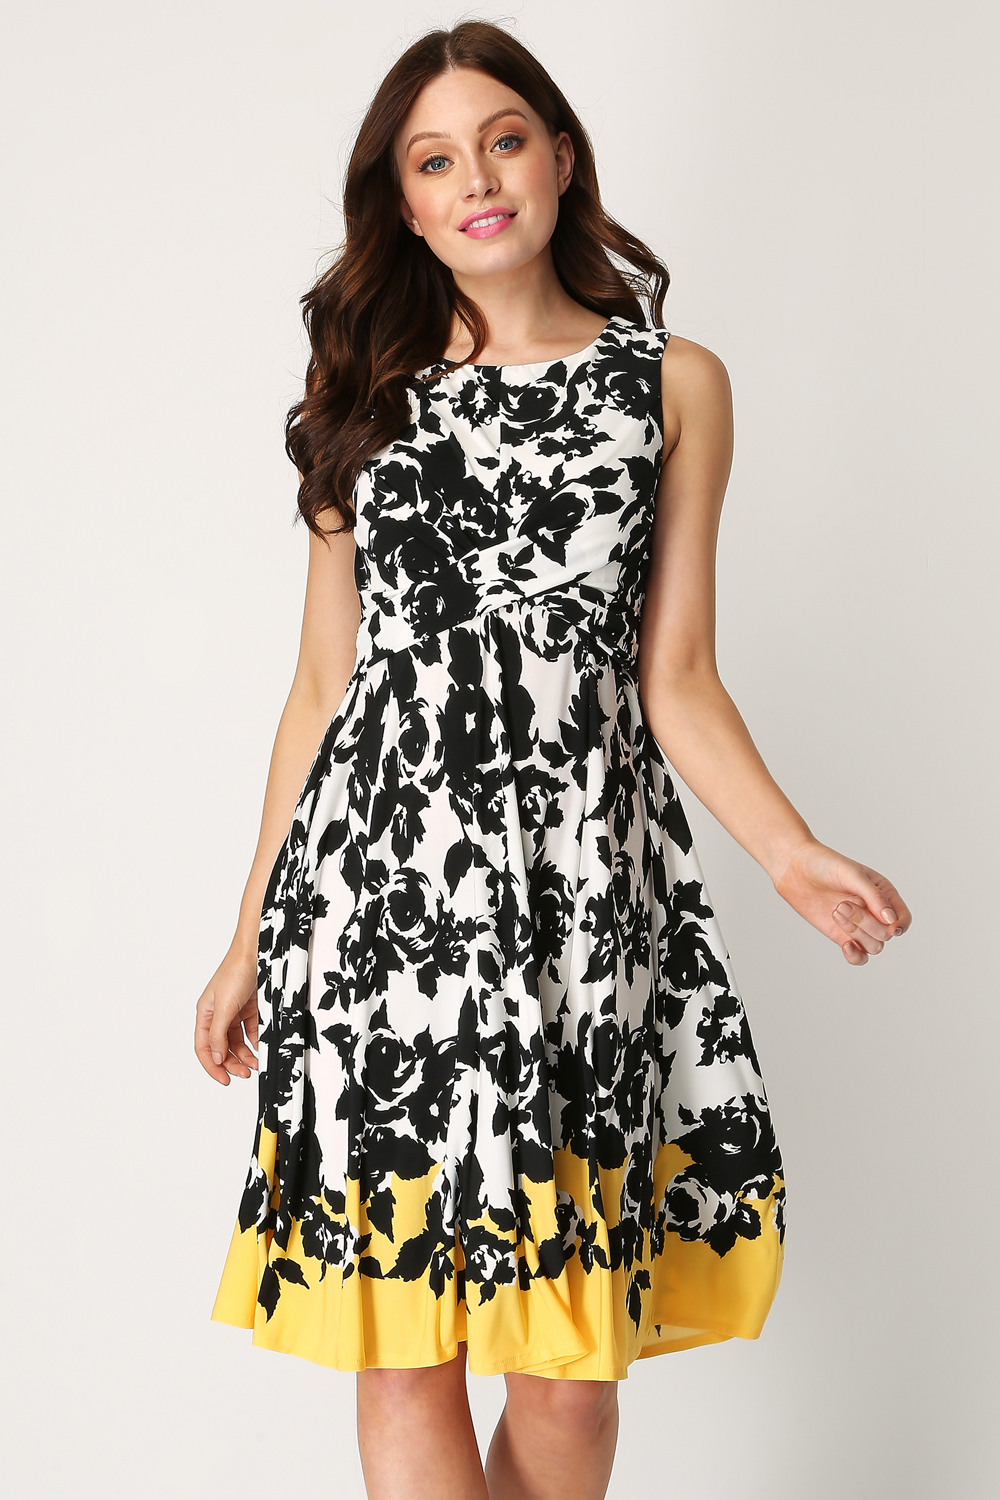 Fit and Flare Contrast Floral Dress in Yellow - Roman Originals UK